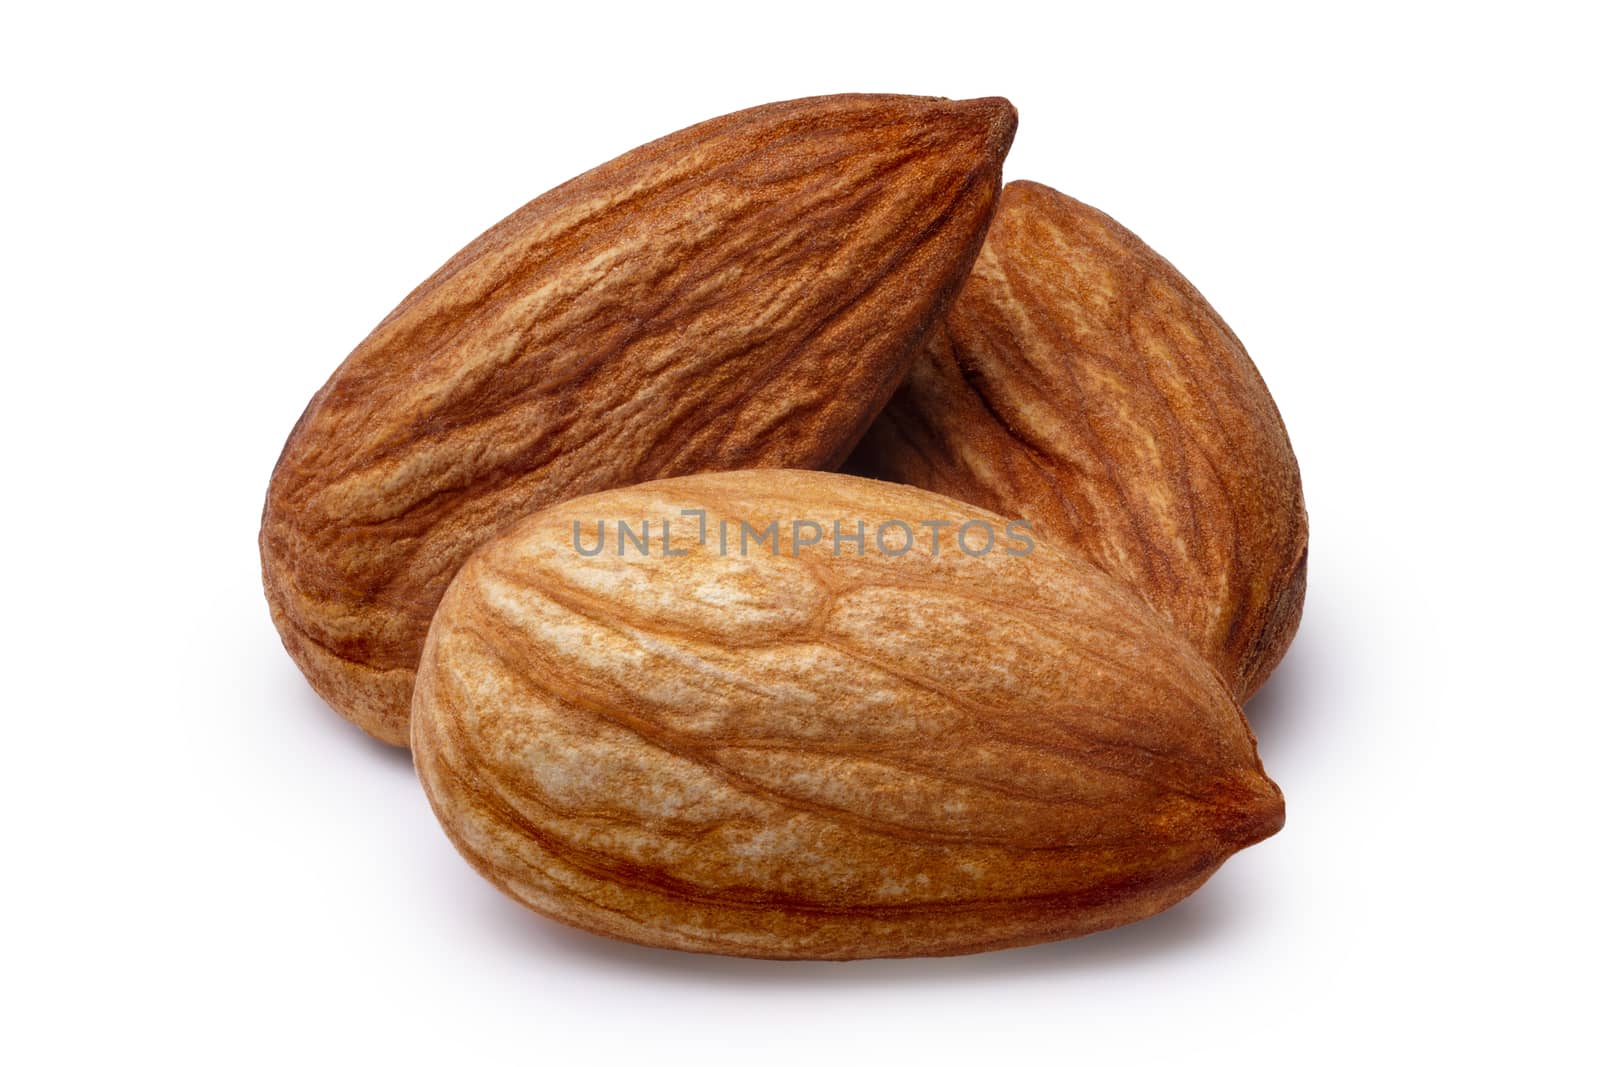 Three shelled almonds (fruits of Prunus amygdalus). Infinite depth of field,clipping paths